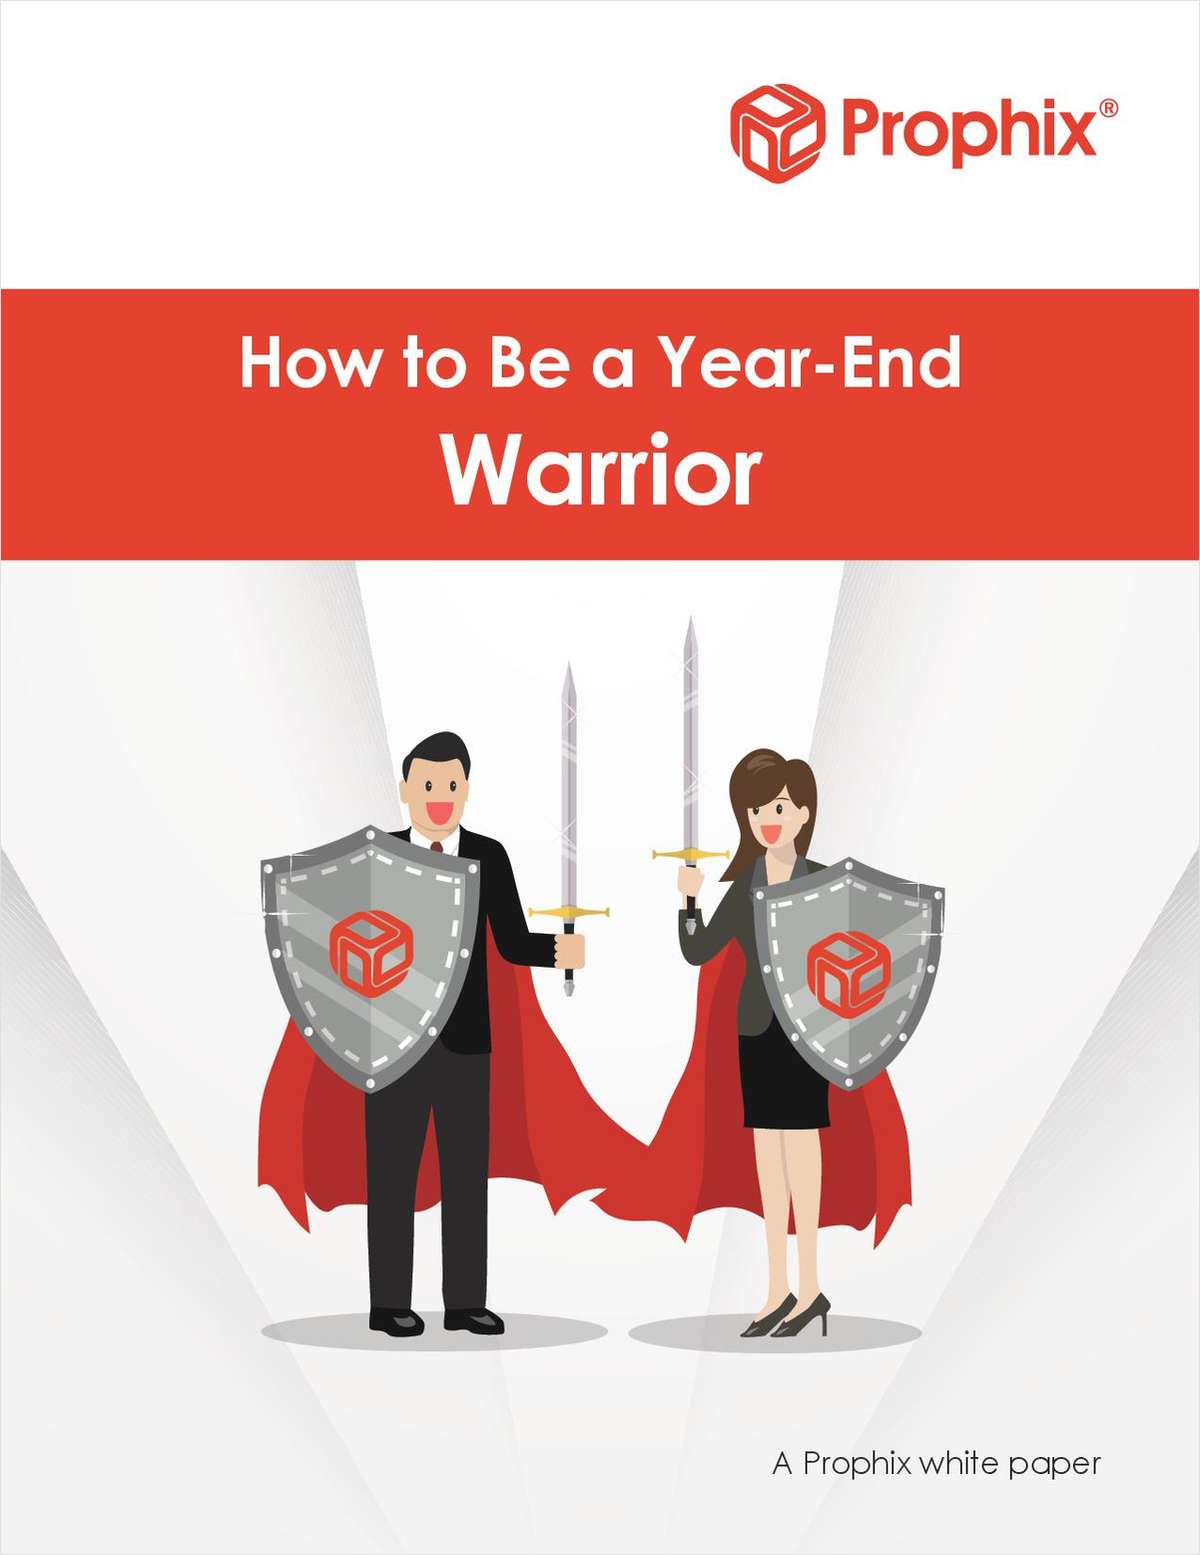 How to Become a Year-End Warrior